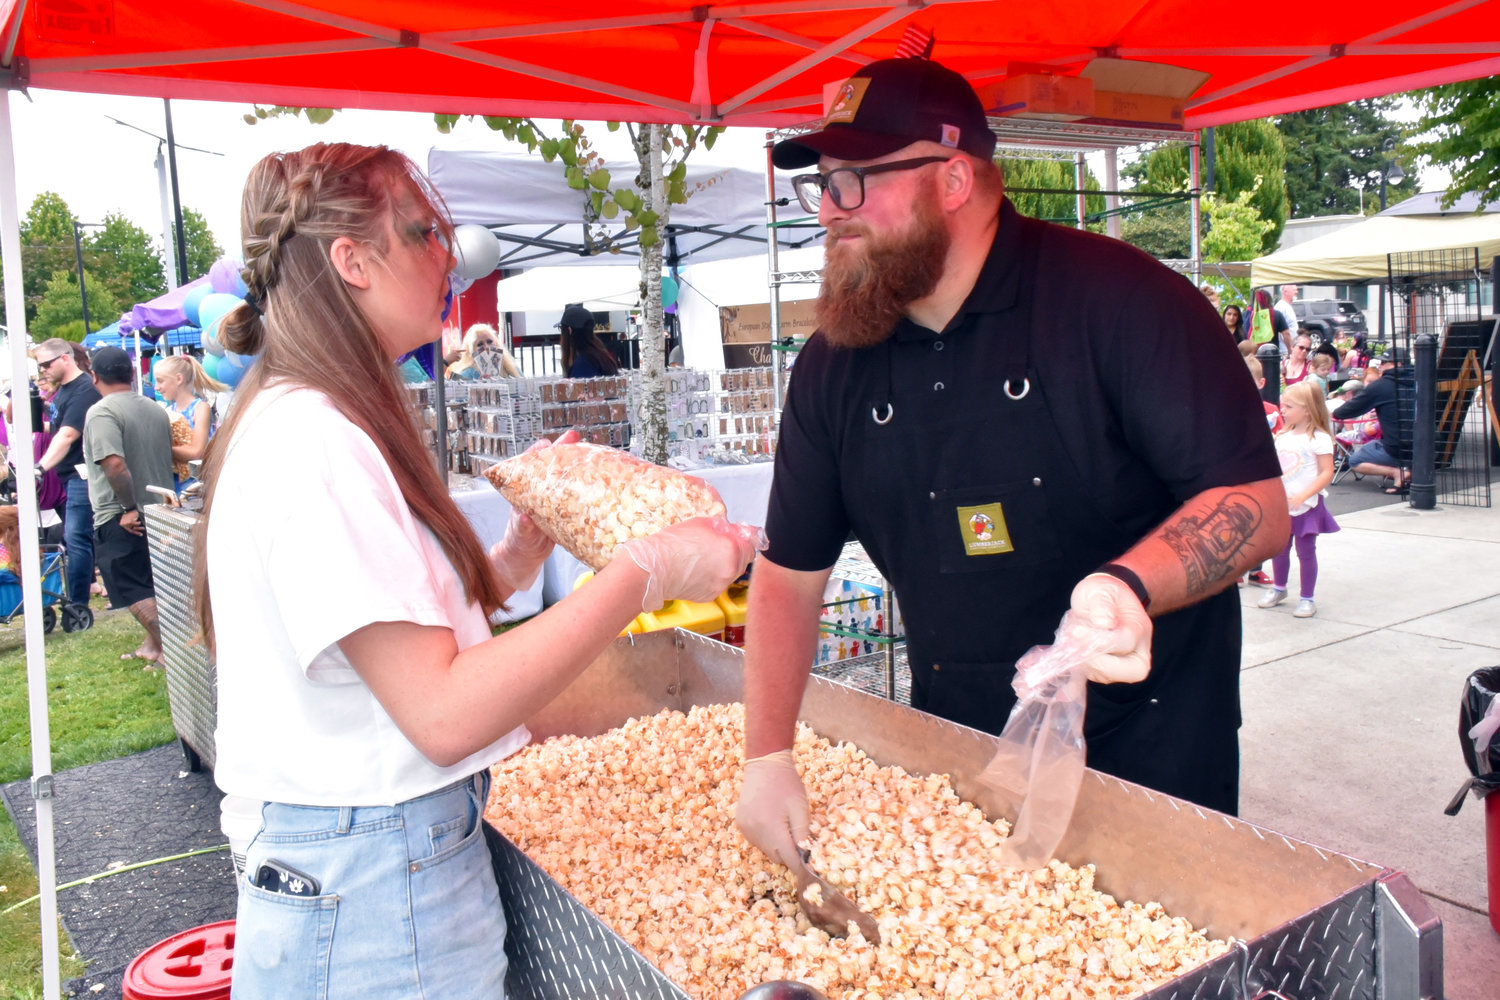 Popcorn vendors work hard to supply the thousands of mermaids hungry for fair food at the 2021 Yelm Mermaid Festival on Saturday, July 17, at Yelm City Park.